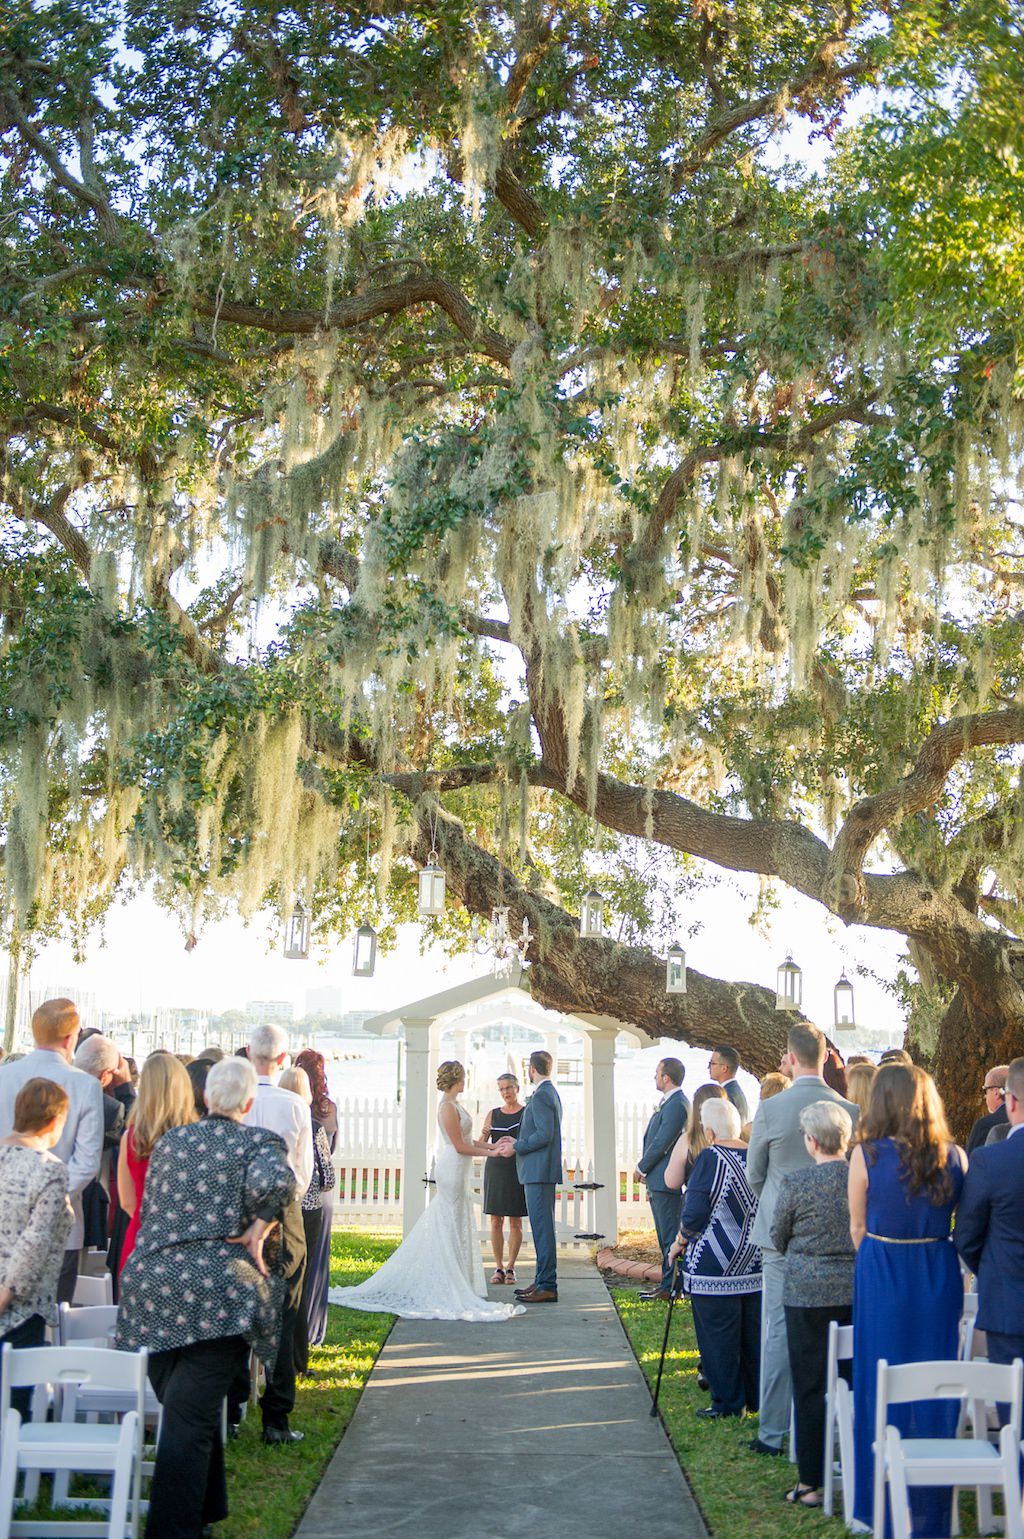 Outdoor Waterfront Wedding Ceremony Portrait with White Folding CHairs under Live Oak Tree with Spanish Moss and Hanging Hurricane Lanterns | Tampa Bay Wedding Photographer Andi Diamond Photography | Sarasota Wedding Venue Palmetto Riverside Bed and Breakfast